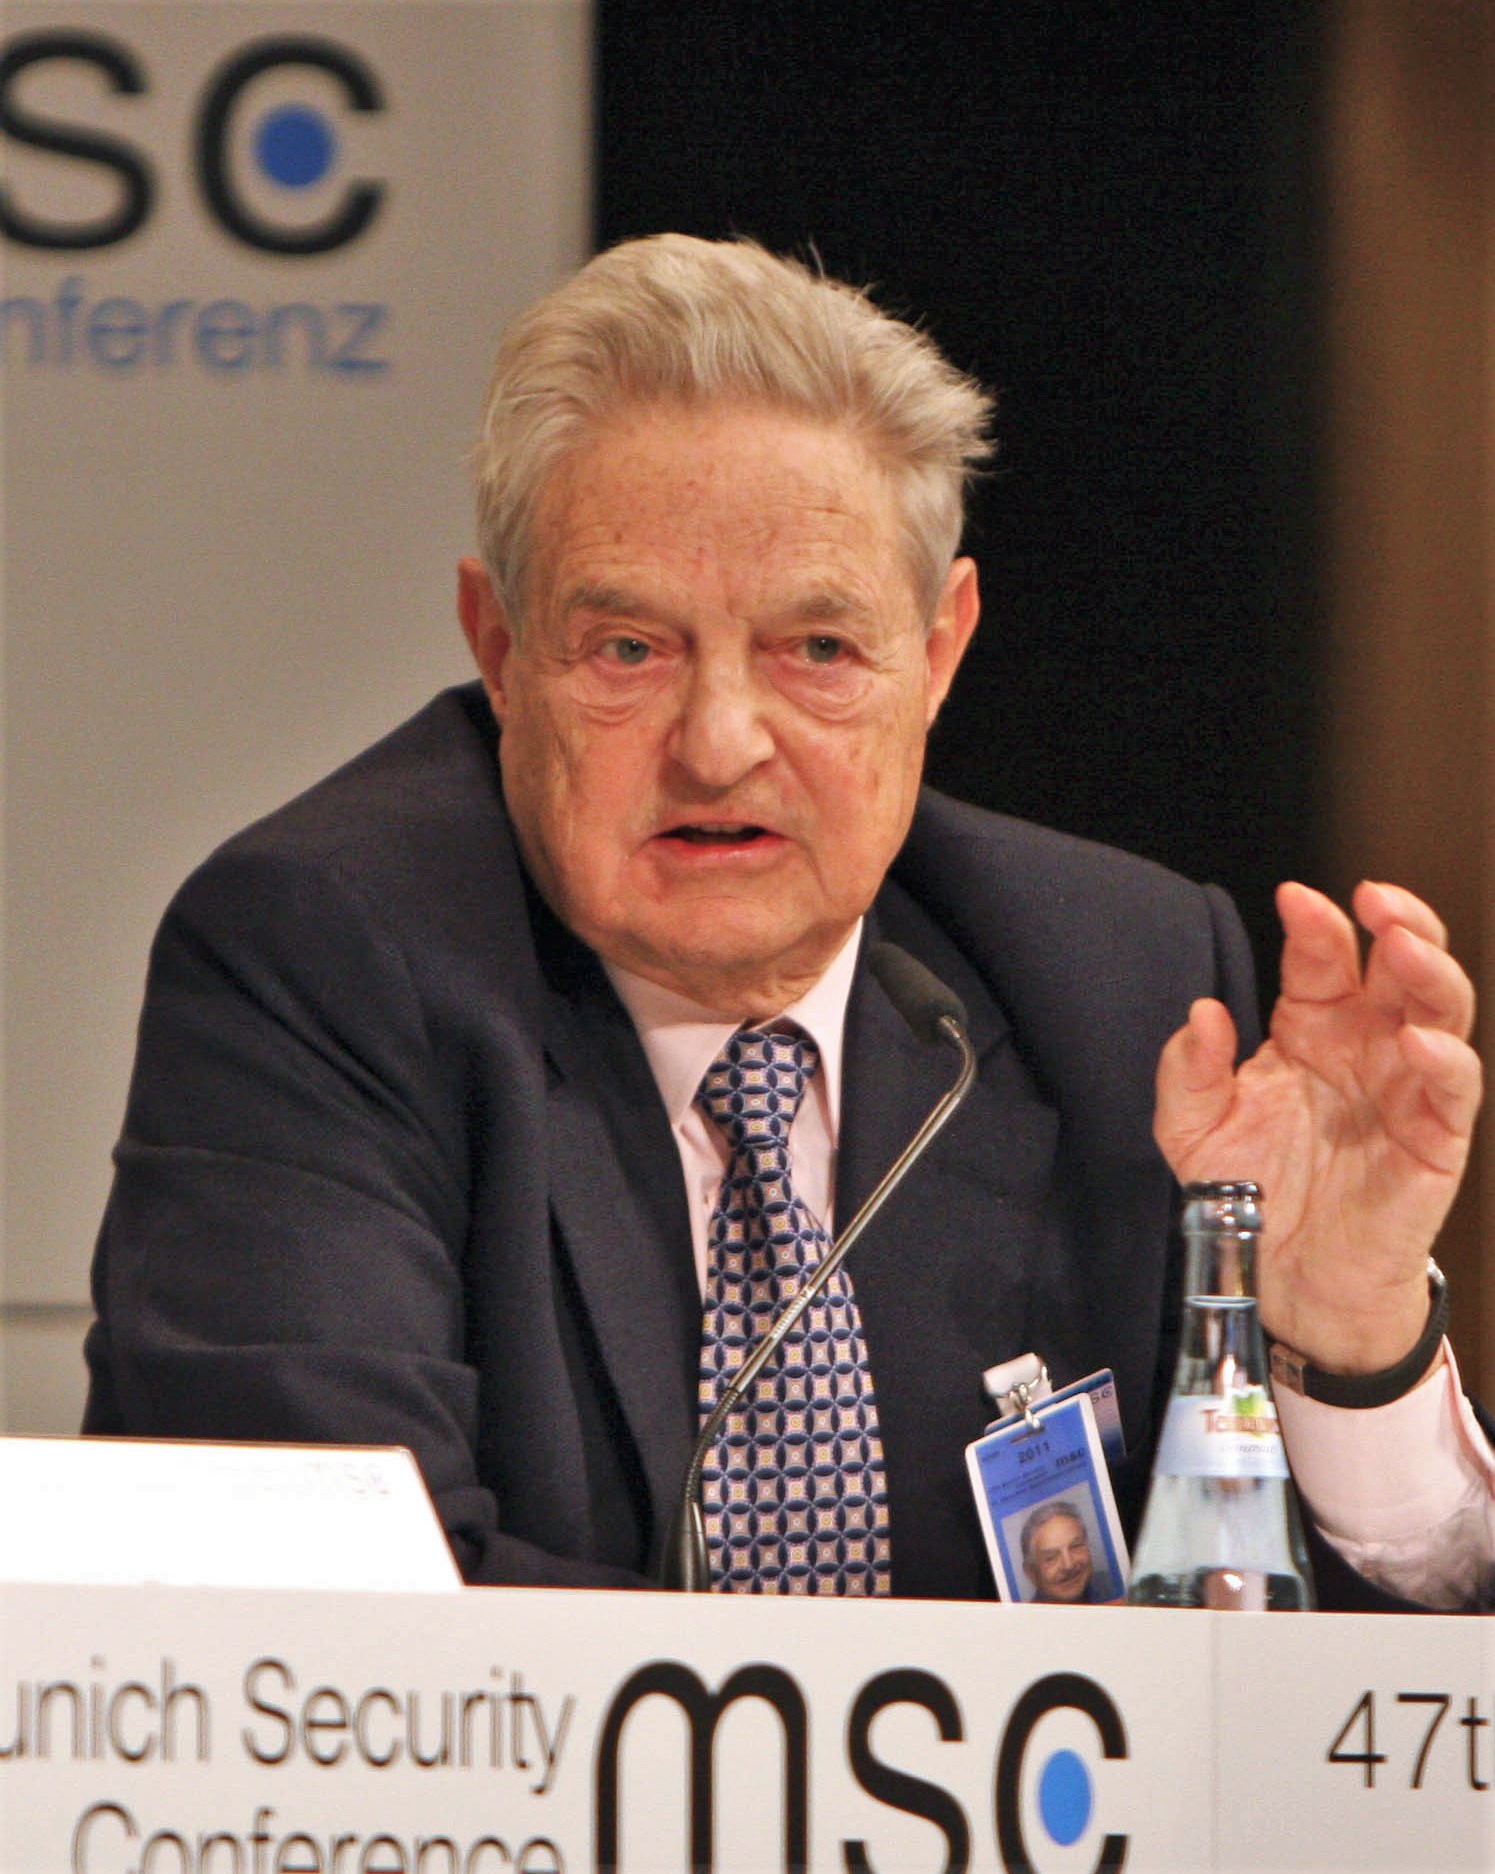 US financier and philanthropist George Soros expressed grief that the world's strongest powers -- the United States, China and Russia -- were 